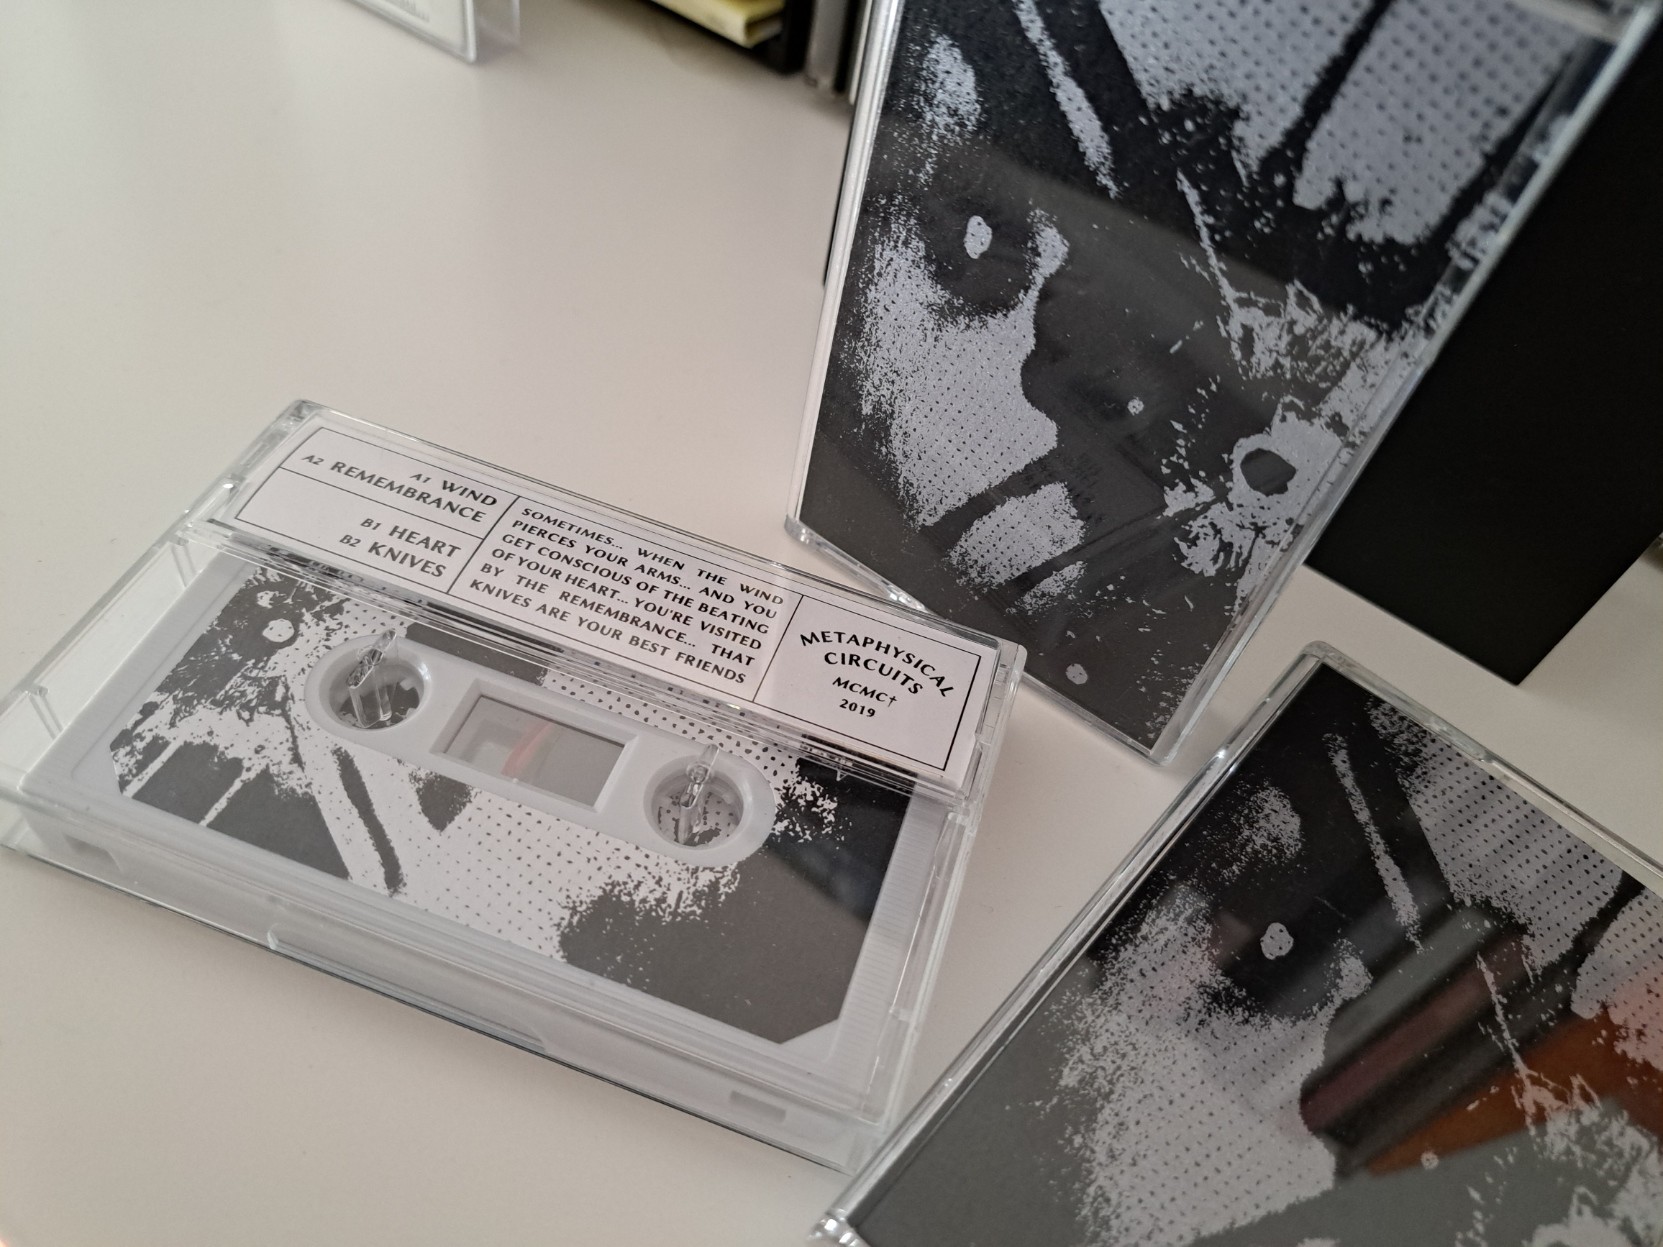 A picture showing three different copies of Qink's tape, in different positions.